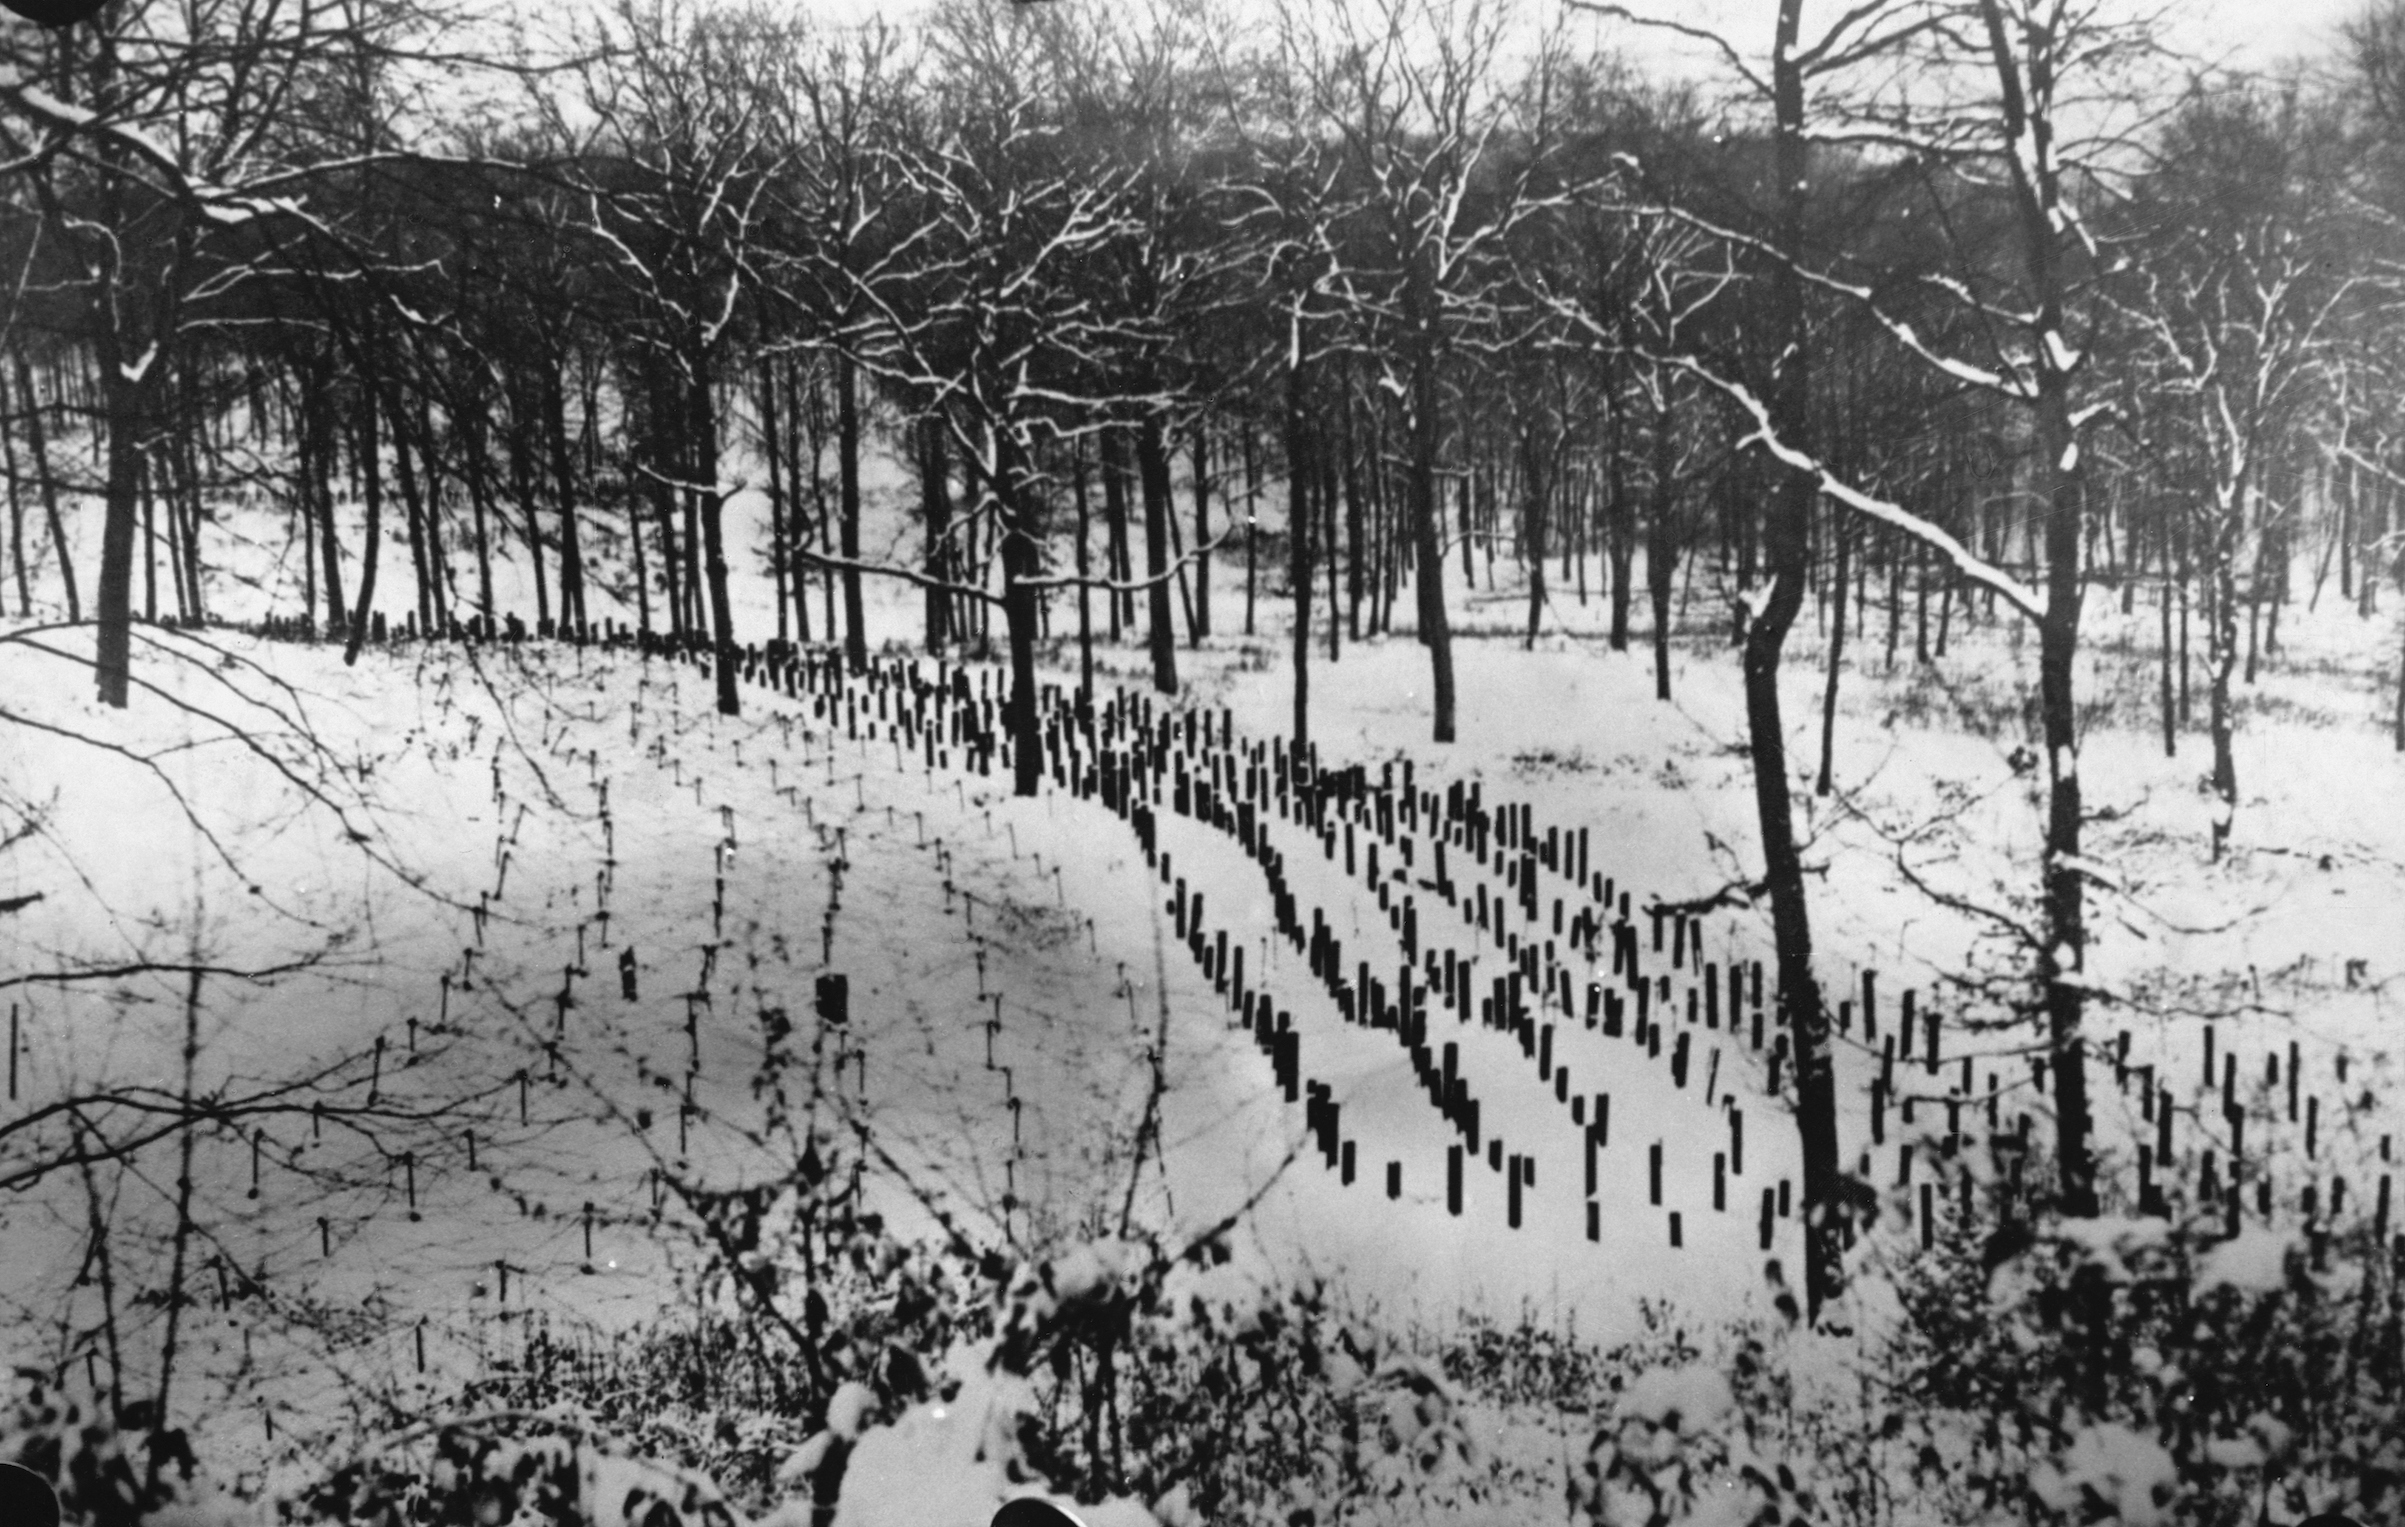 At the Maginot Line, rows of small posts in the snow to prevent the advance of German tanks and troops, ca. 1940 (Hulton Deutsch/Corbis/Getty Images)